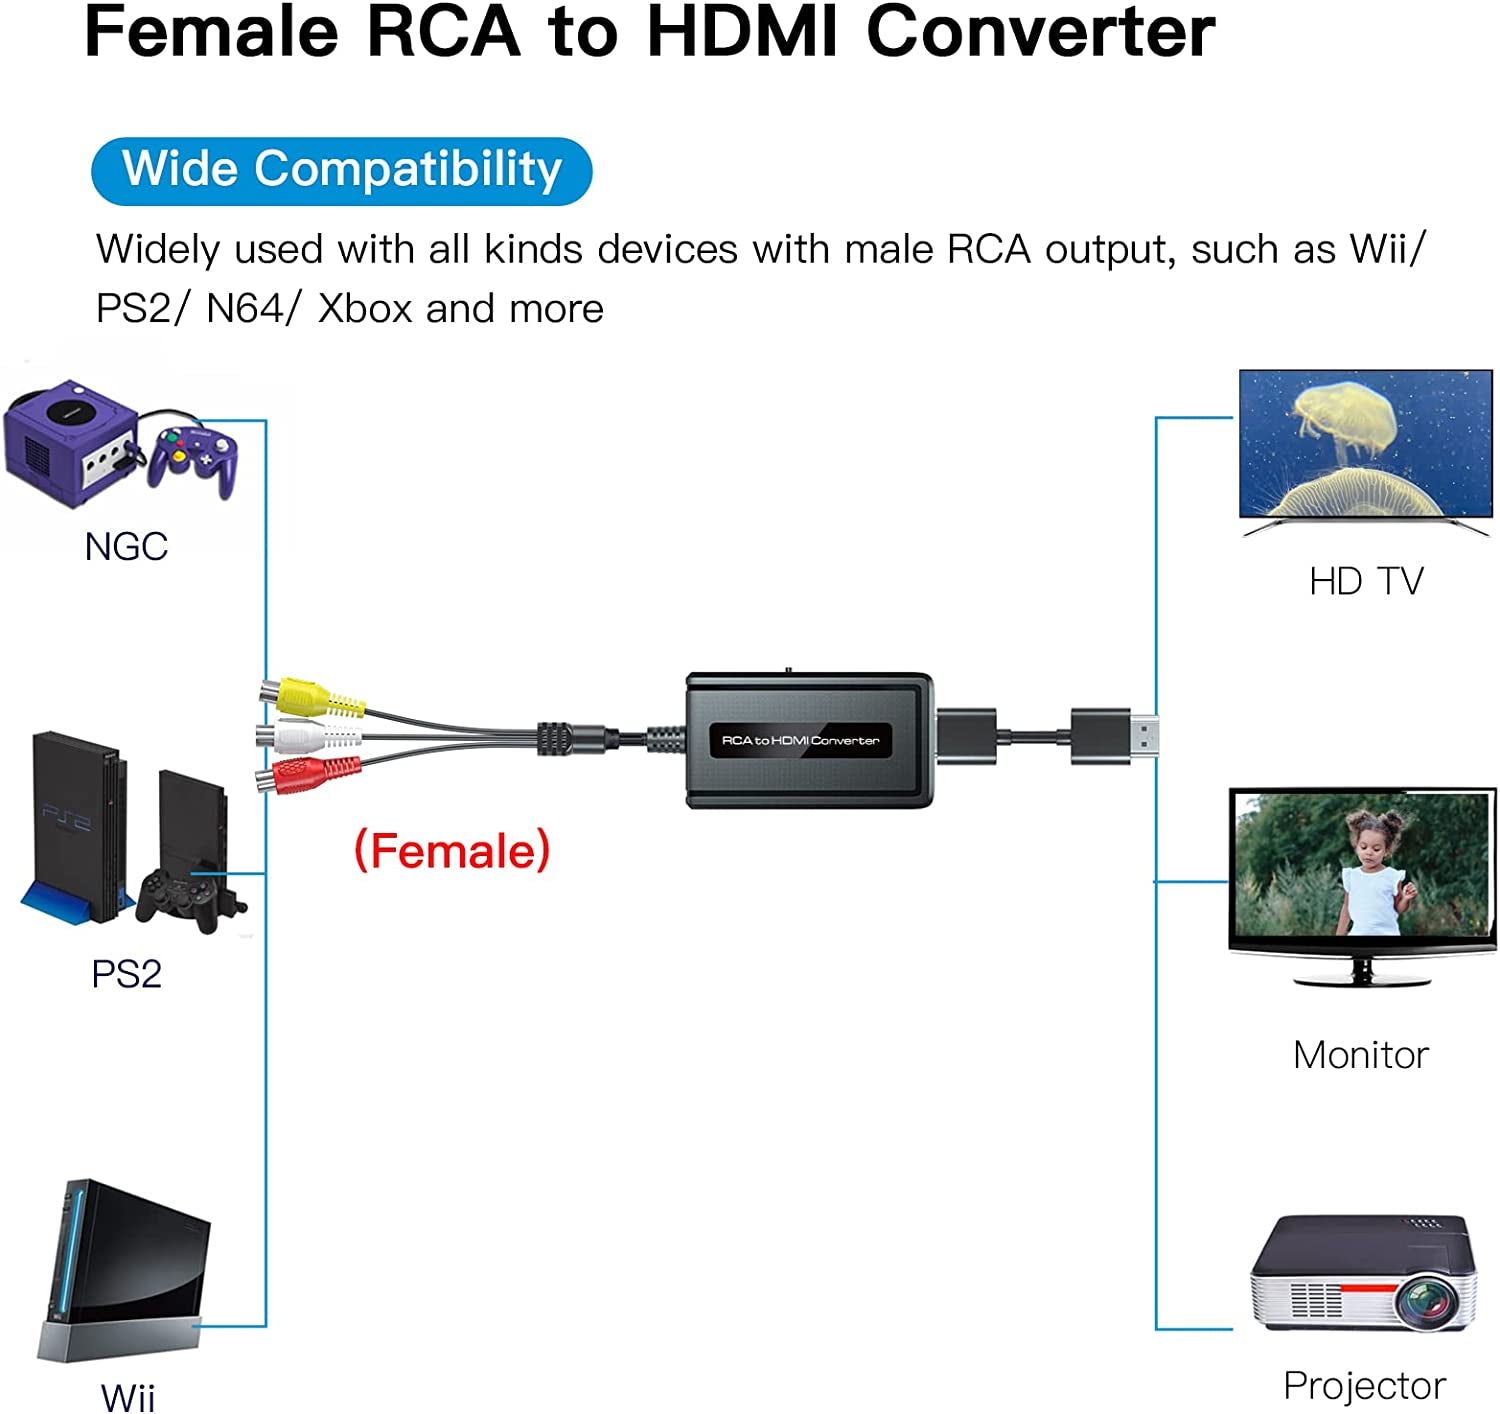 Female RCA to HDMI Converter with HDMI Cable for N64/Wii/Ps2/Xbox with Male RCA(RCA Cable Integrated), CVBS AV Composite to HDMI Converter Supports Full HD 720P/1080P Output Switch